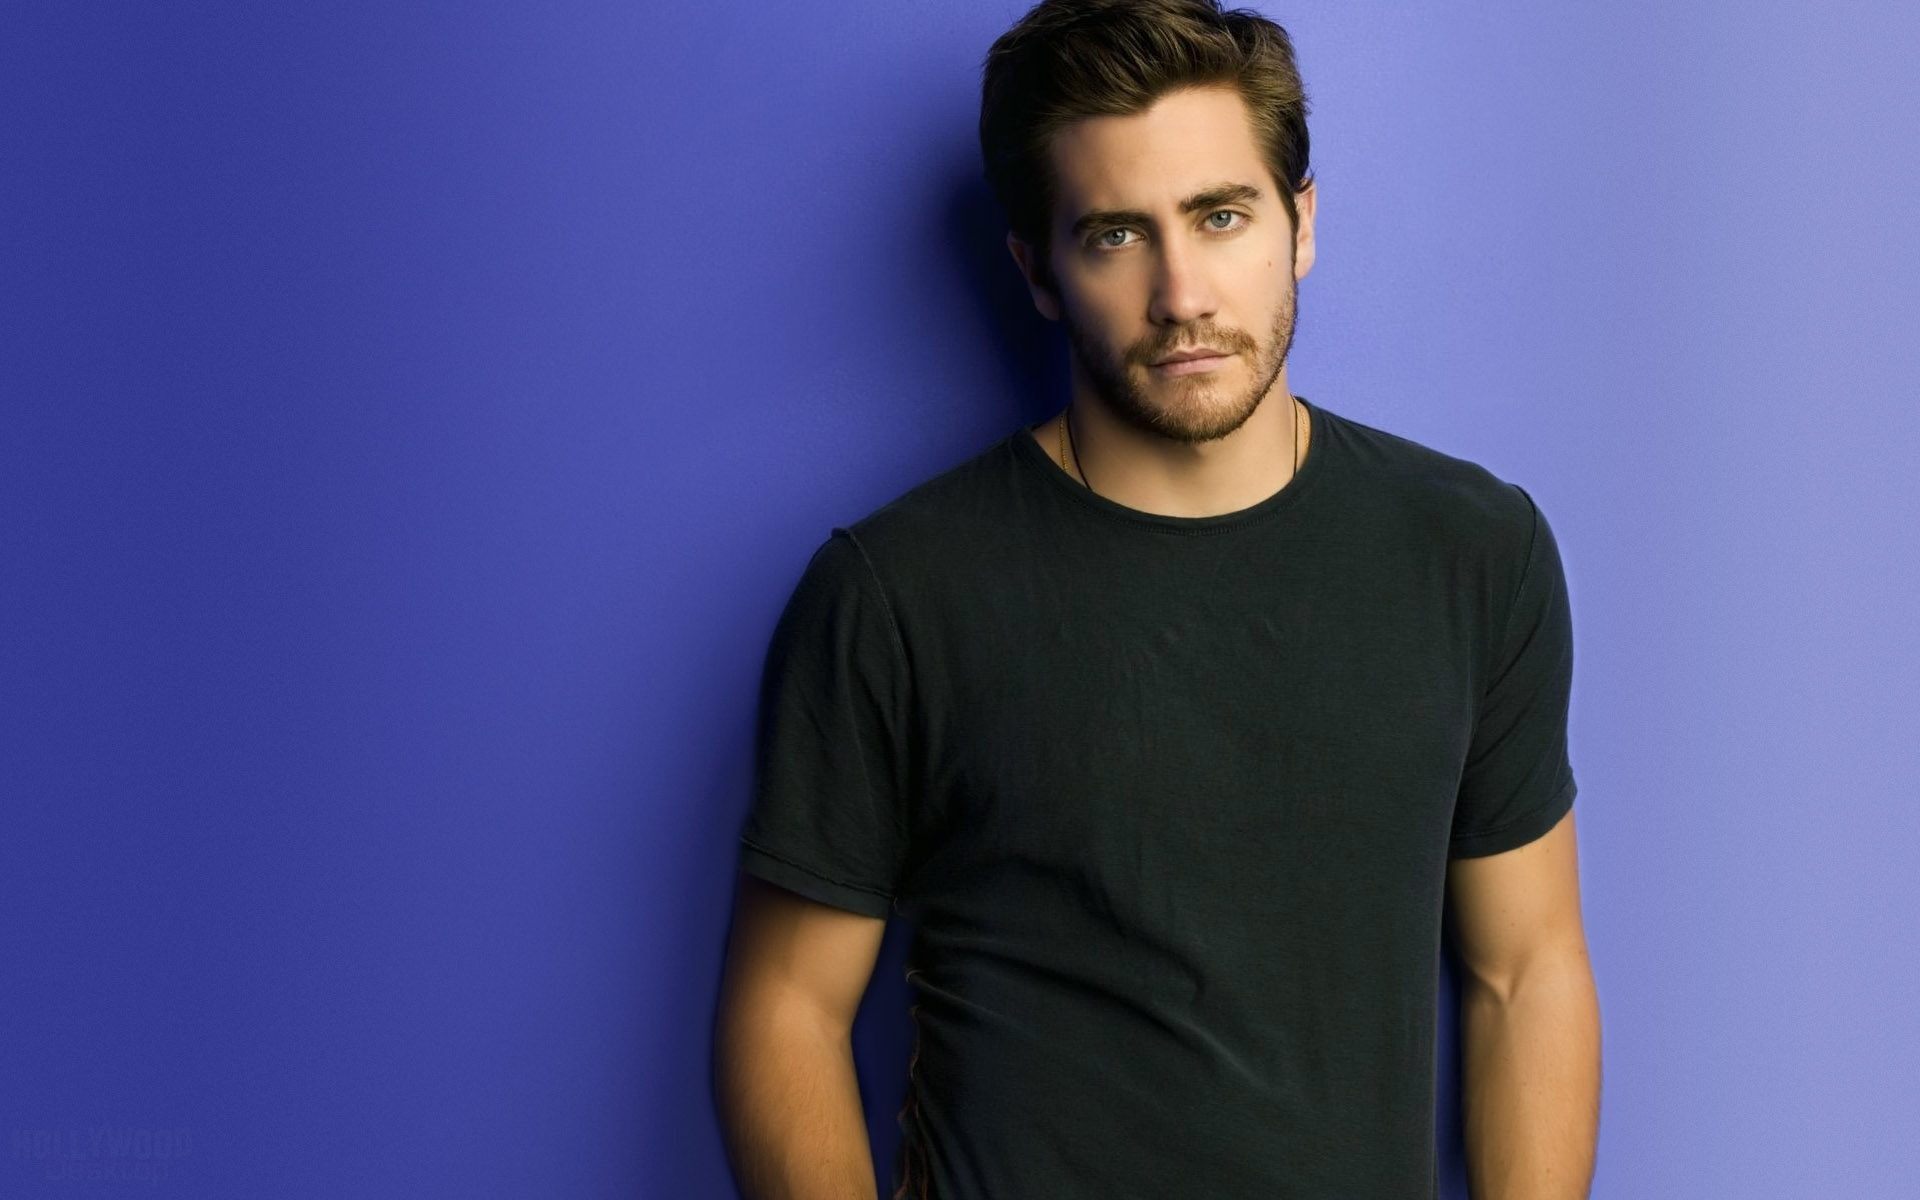 Wallpaper, black, model, T shirt, brunette, top, Jake Gyllenhaal, male, muscle, neck, chin, shoulder, facial hair, sleeve, electric blue, young man, white collar worker 1920x1200